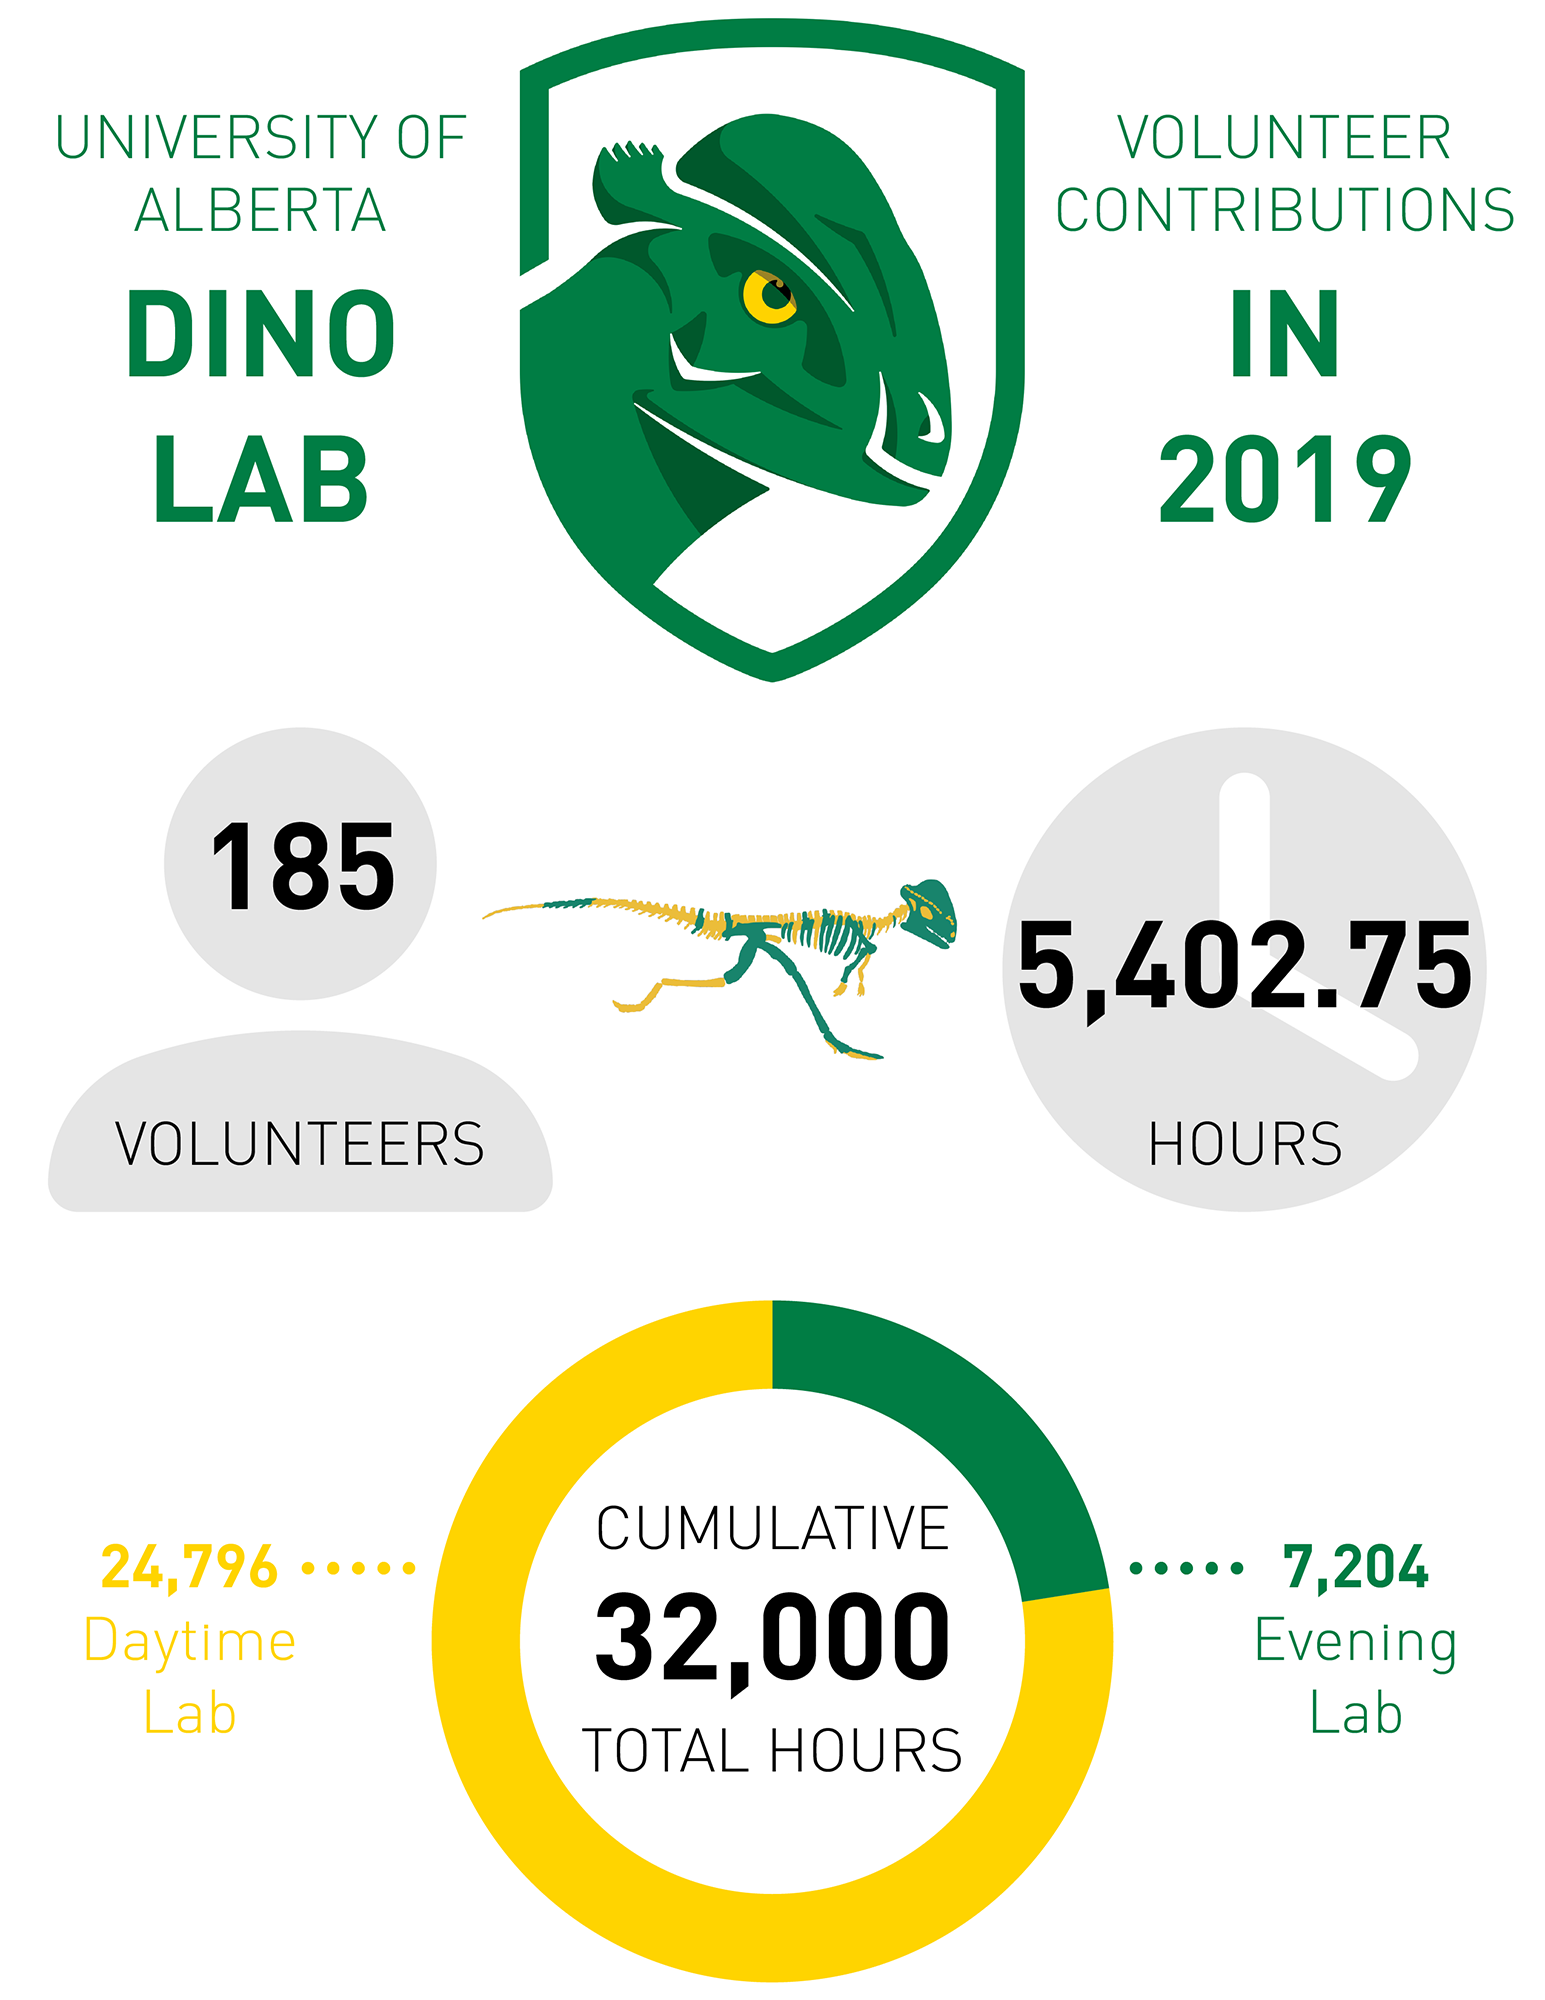 Dino Lab infographic: general information and volunteer contributions